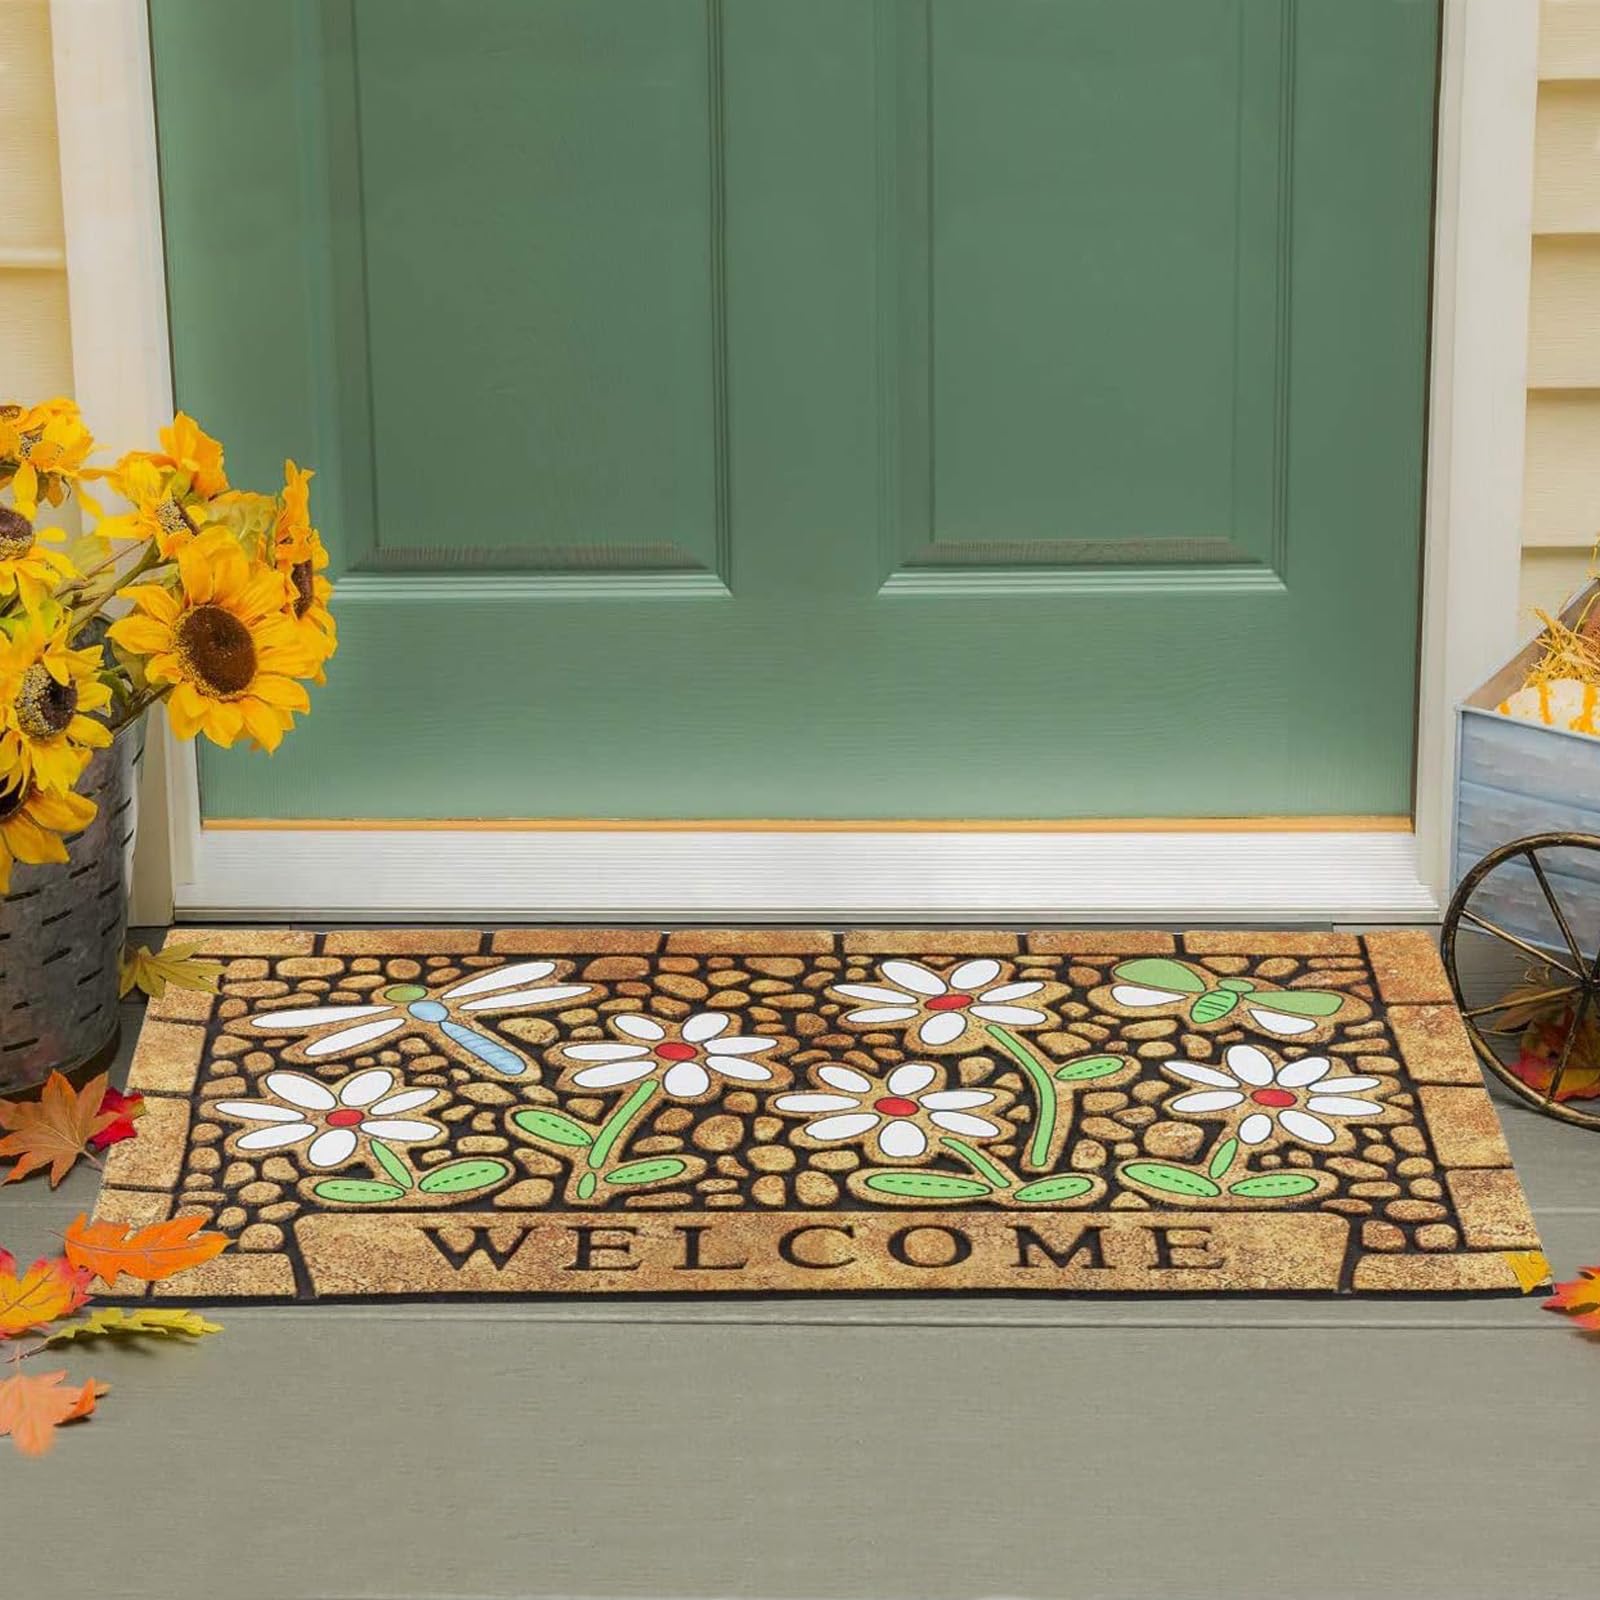 CHICHIC Door Mat, Welcome Mat 17x 30 Inch Front Door Mat Outdoors for Home Entrance Outdoors Mat for Outside Entry Way Doormat Entry Rugs, Heavy Duty Non Slip Rubber Back Low Profile, Dragonfly